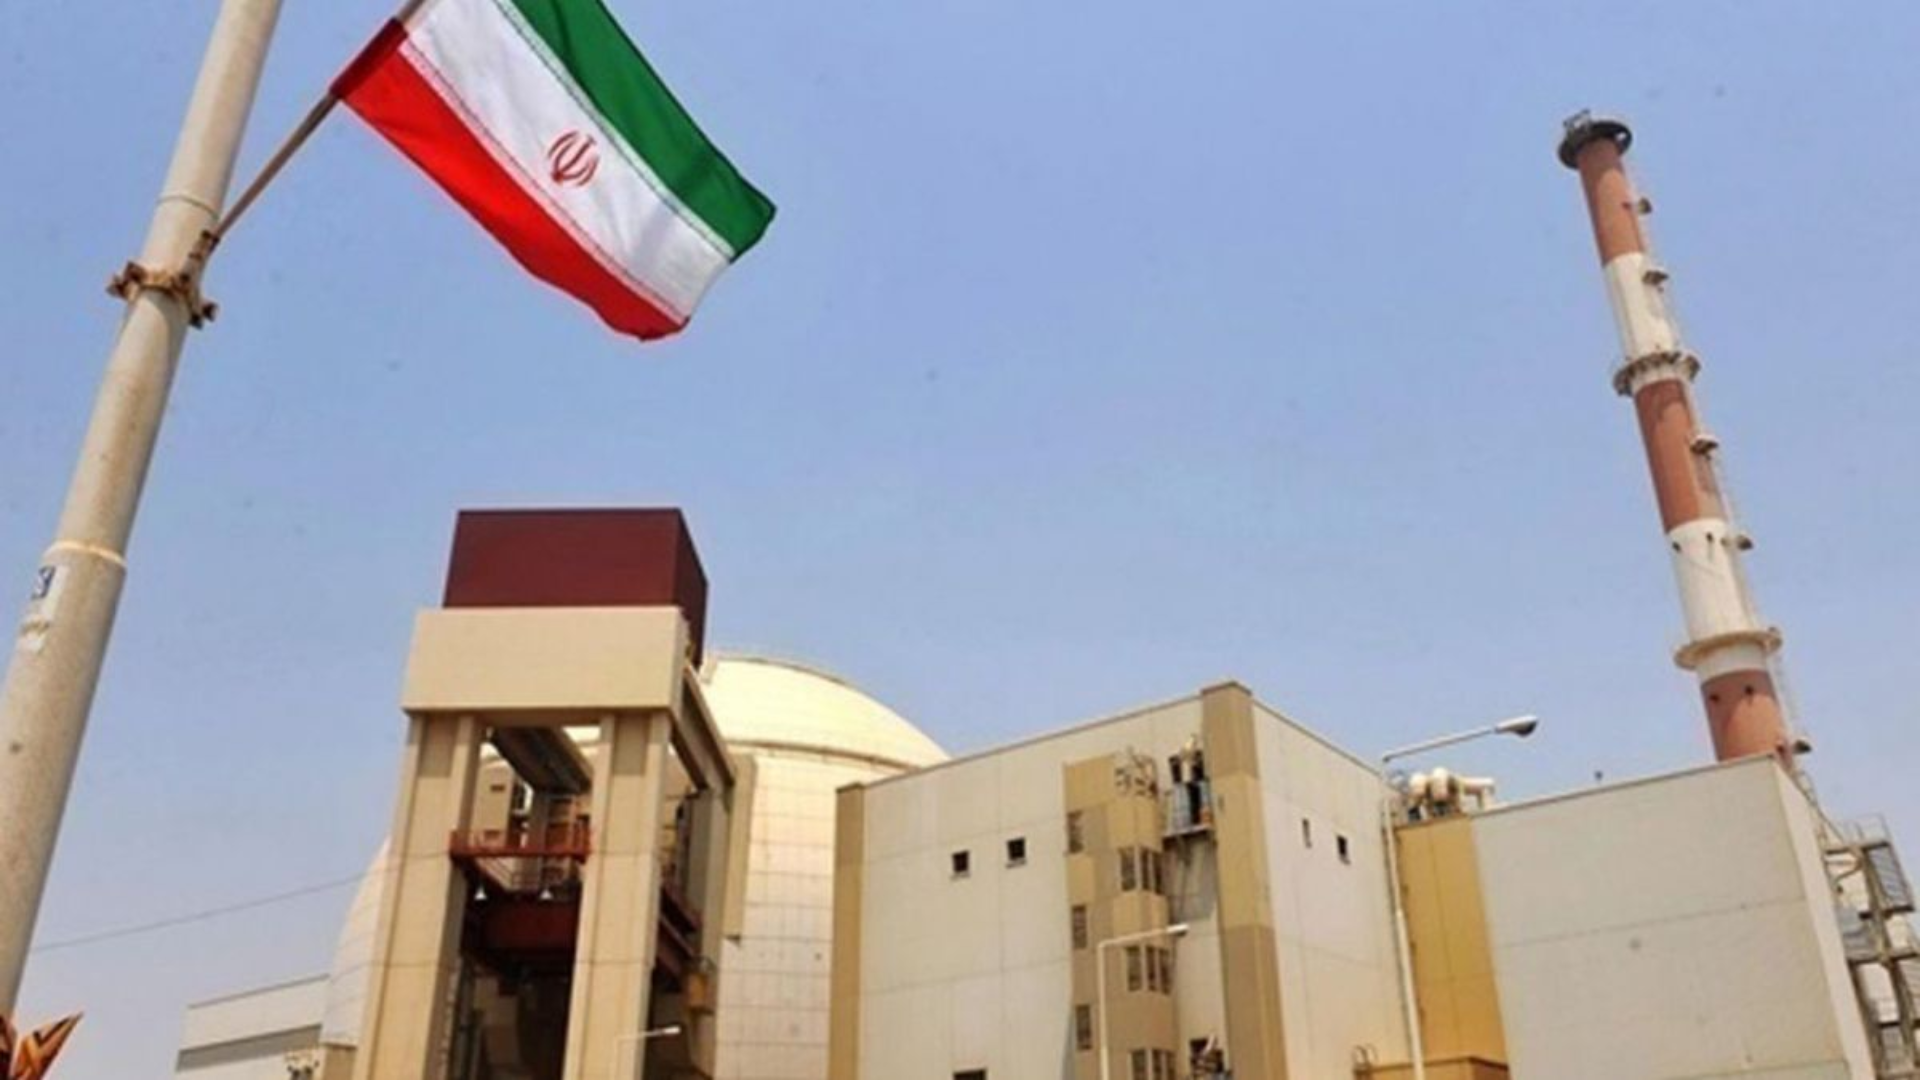 IAEA: Iran’s nuclear sites unharmed after Israel’s reported strikes